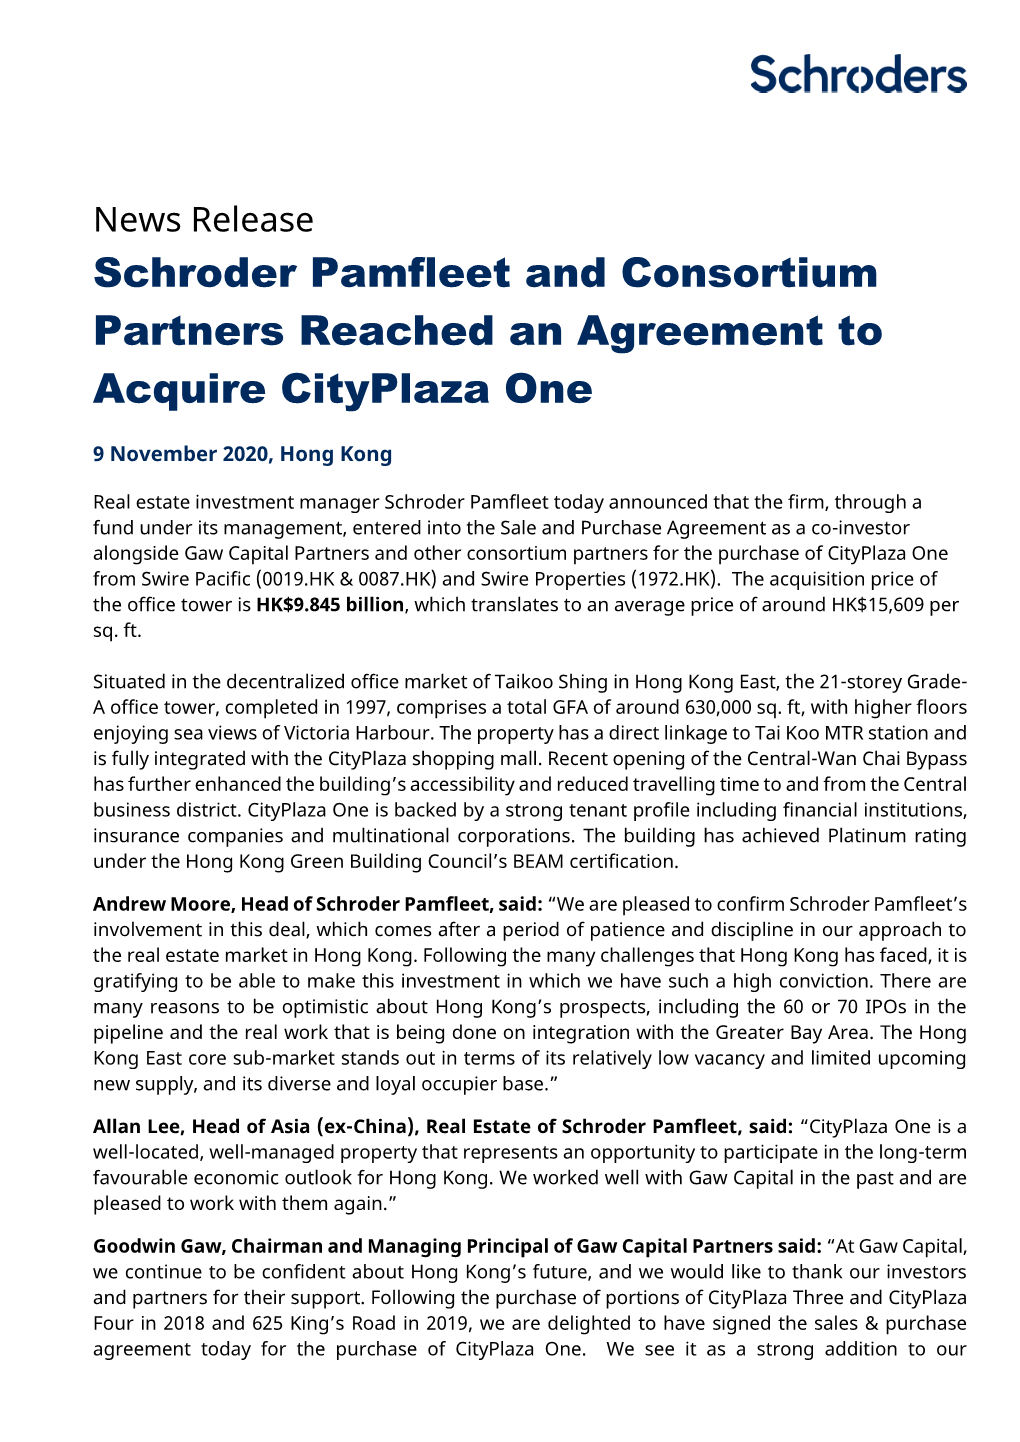 Schroder Pamfleet and Consortium Partners Reached an Agreement to Acquire Cityplaza One